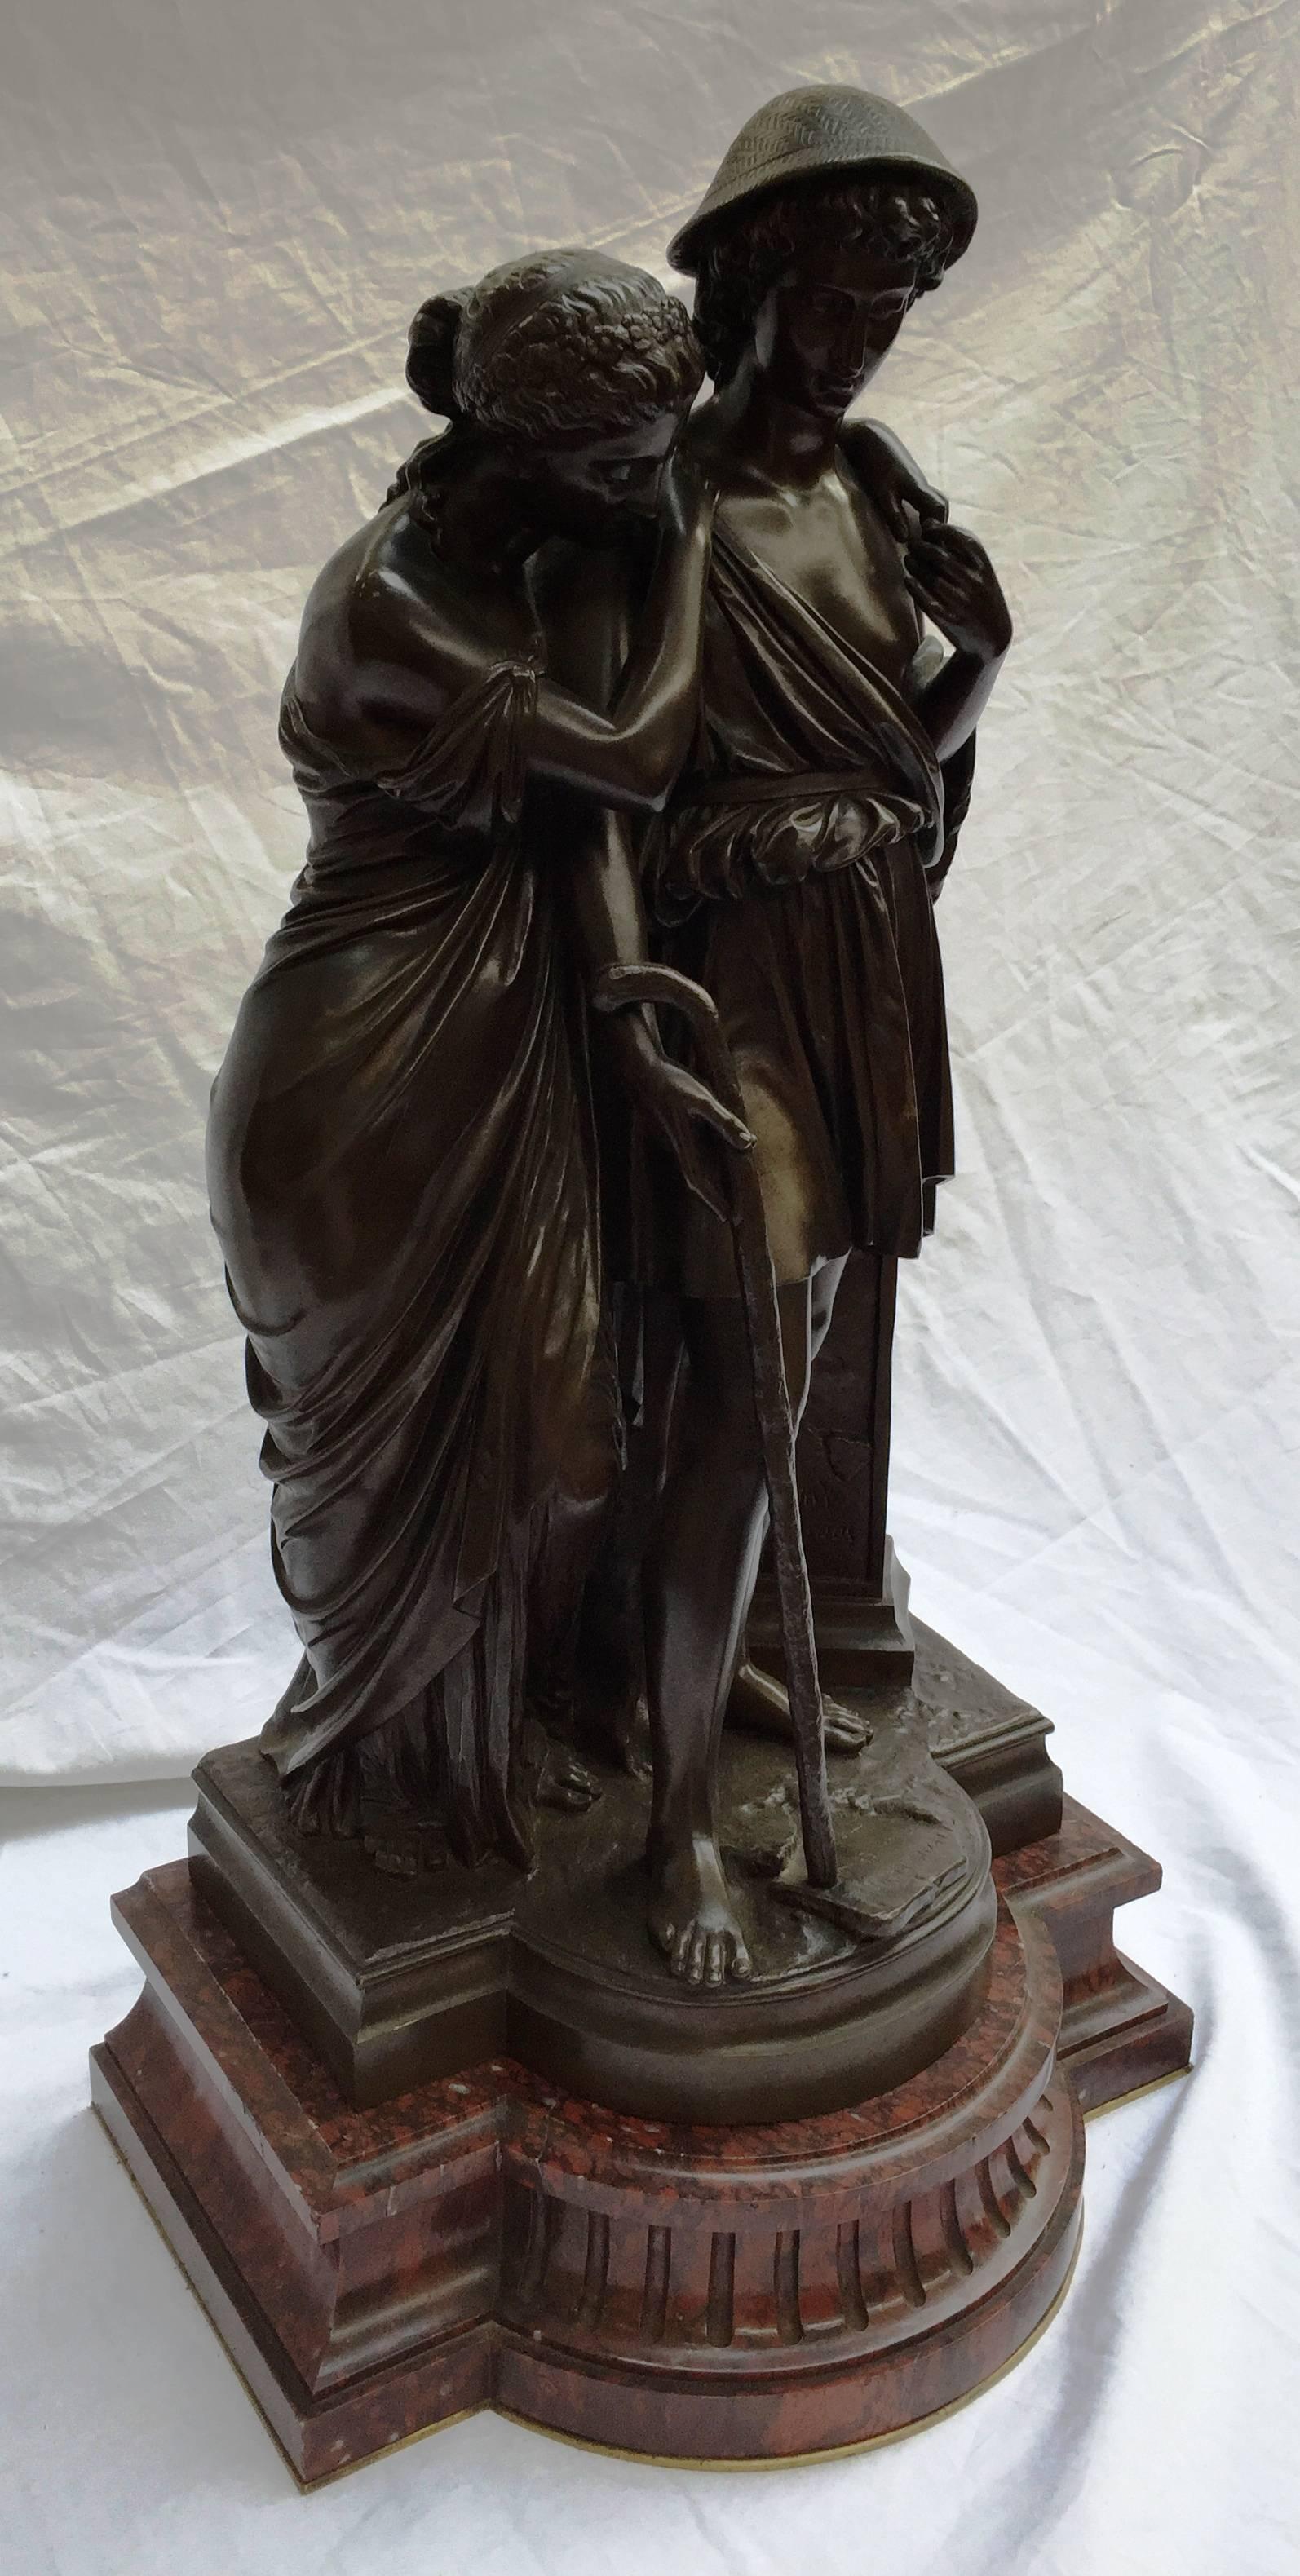 Barbedienne bronze of the Shepherds of Arcadia by Eugene Antoine Aizelin (French 1821-1902) Bergers d'Arcadie. Patinated bronze mounted on a rouge marble base.